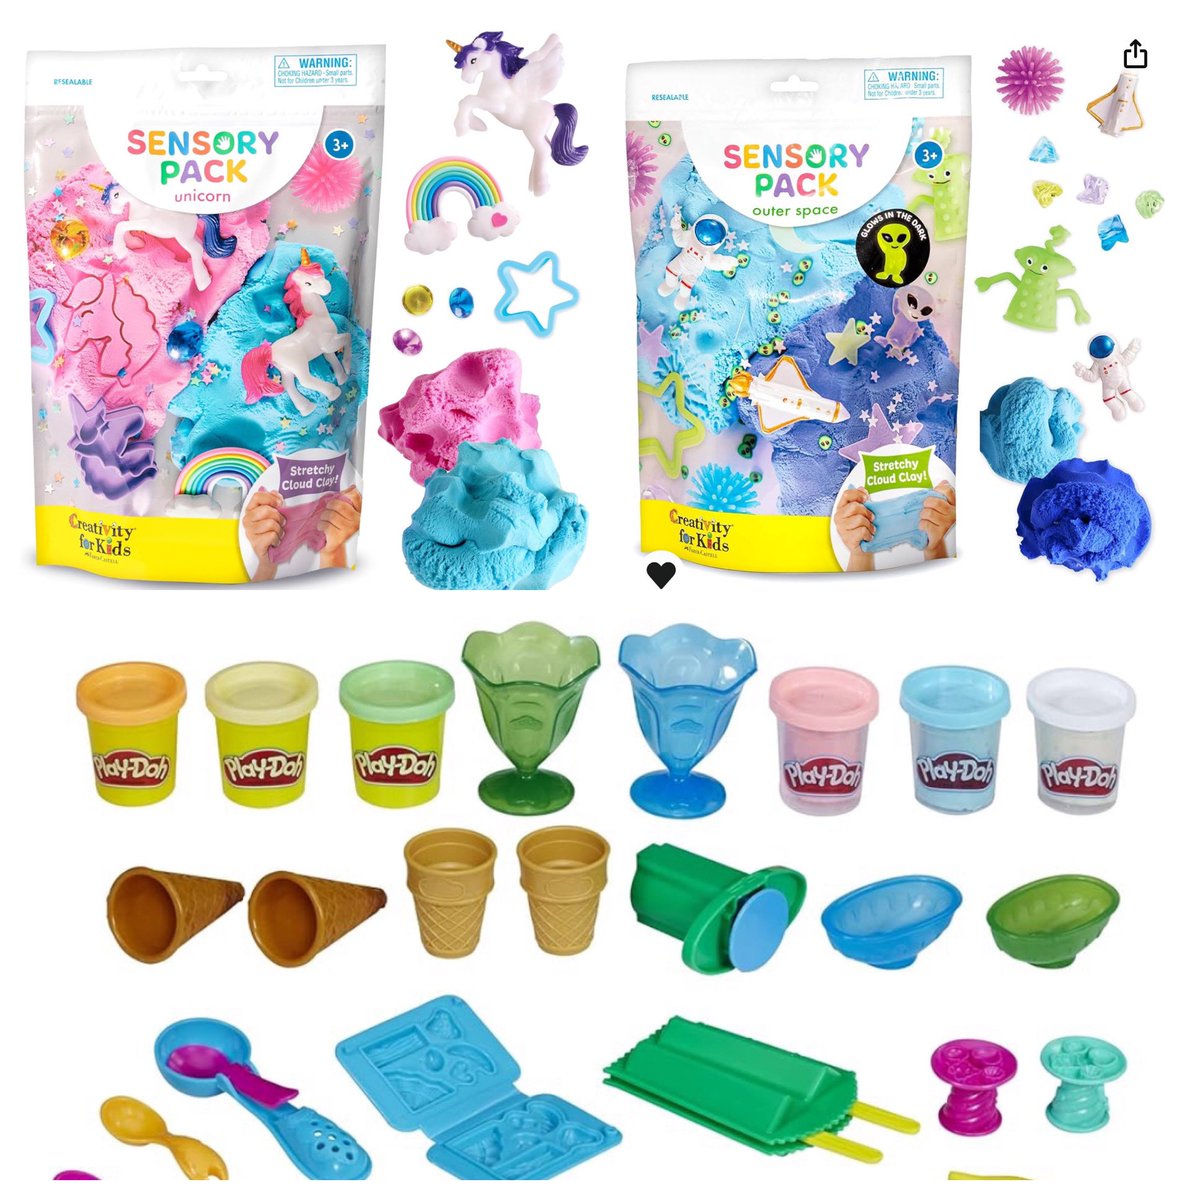 Can you help us end the school year with some SENSORY fun? 🥰 🤞🏻😎 Please RT for us !💙 I teach kindergarten children with Autism. ☀️⛱️ I’d love to end this year with some fun days for my students. They worked so hard and I’m so proud of them. amazon.com/hz/wishlist/ls…